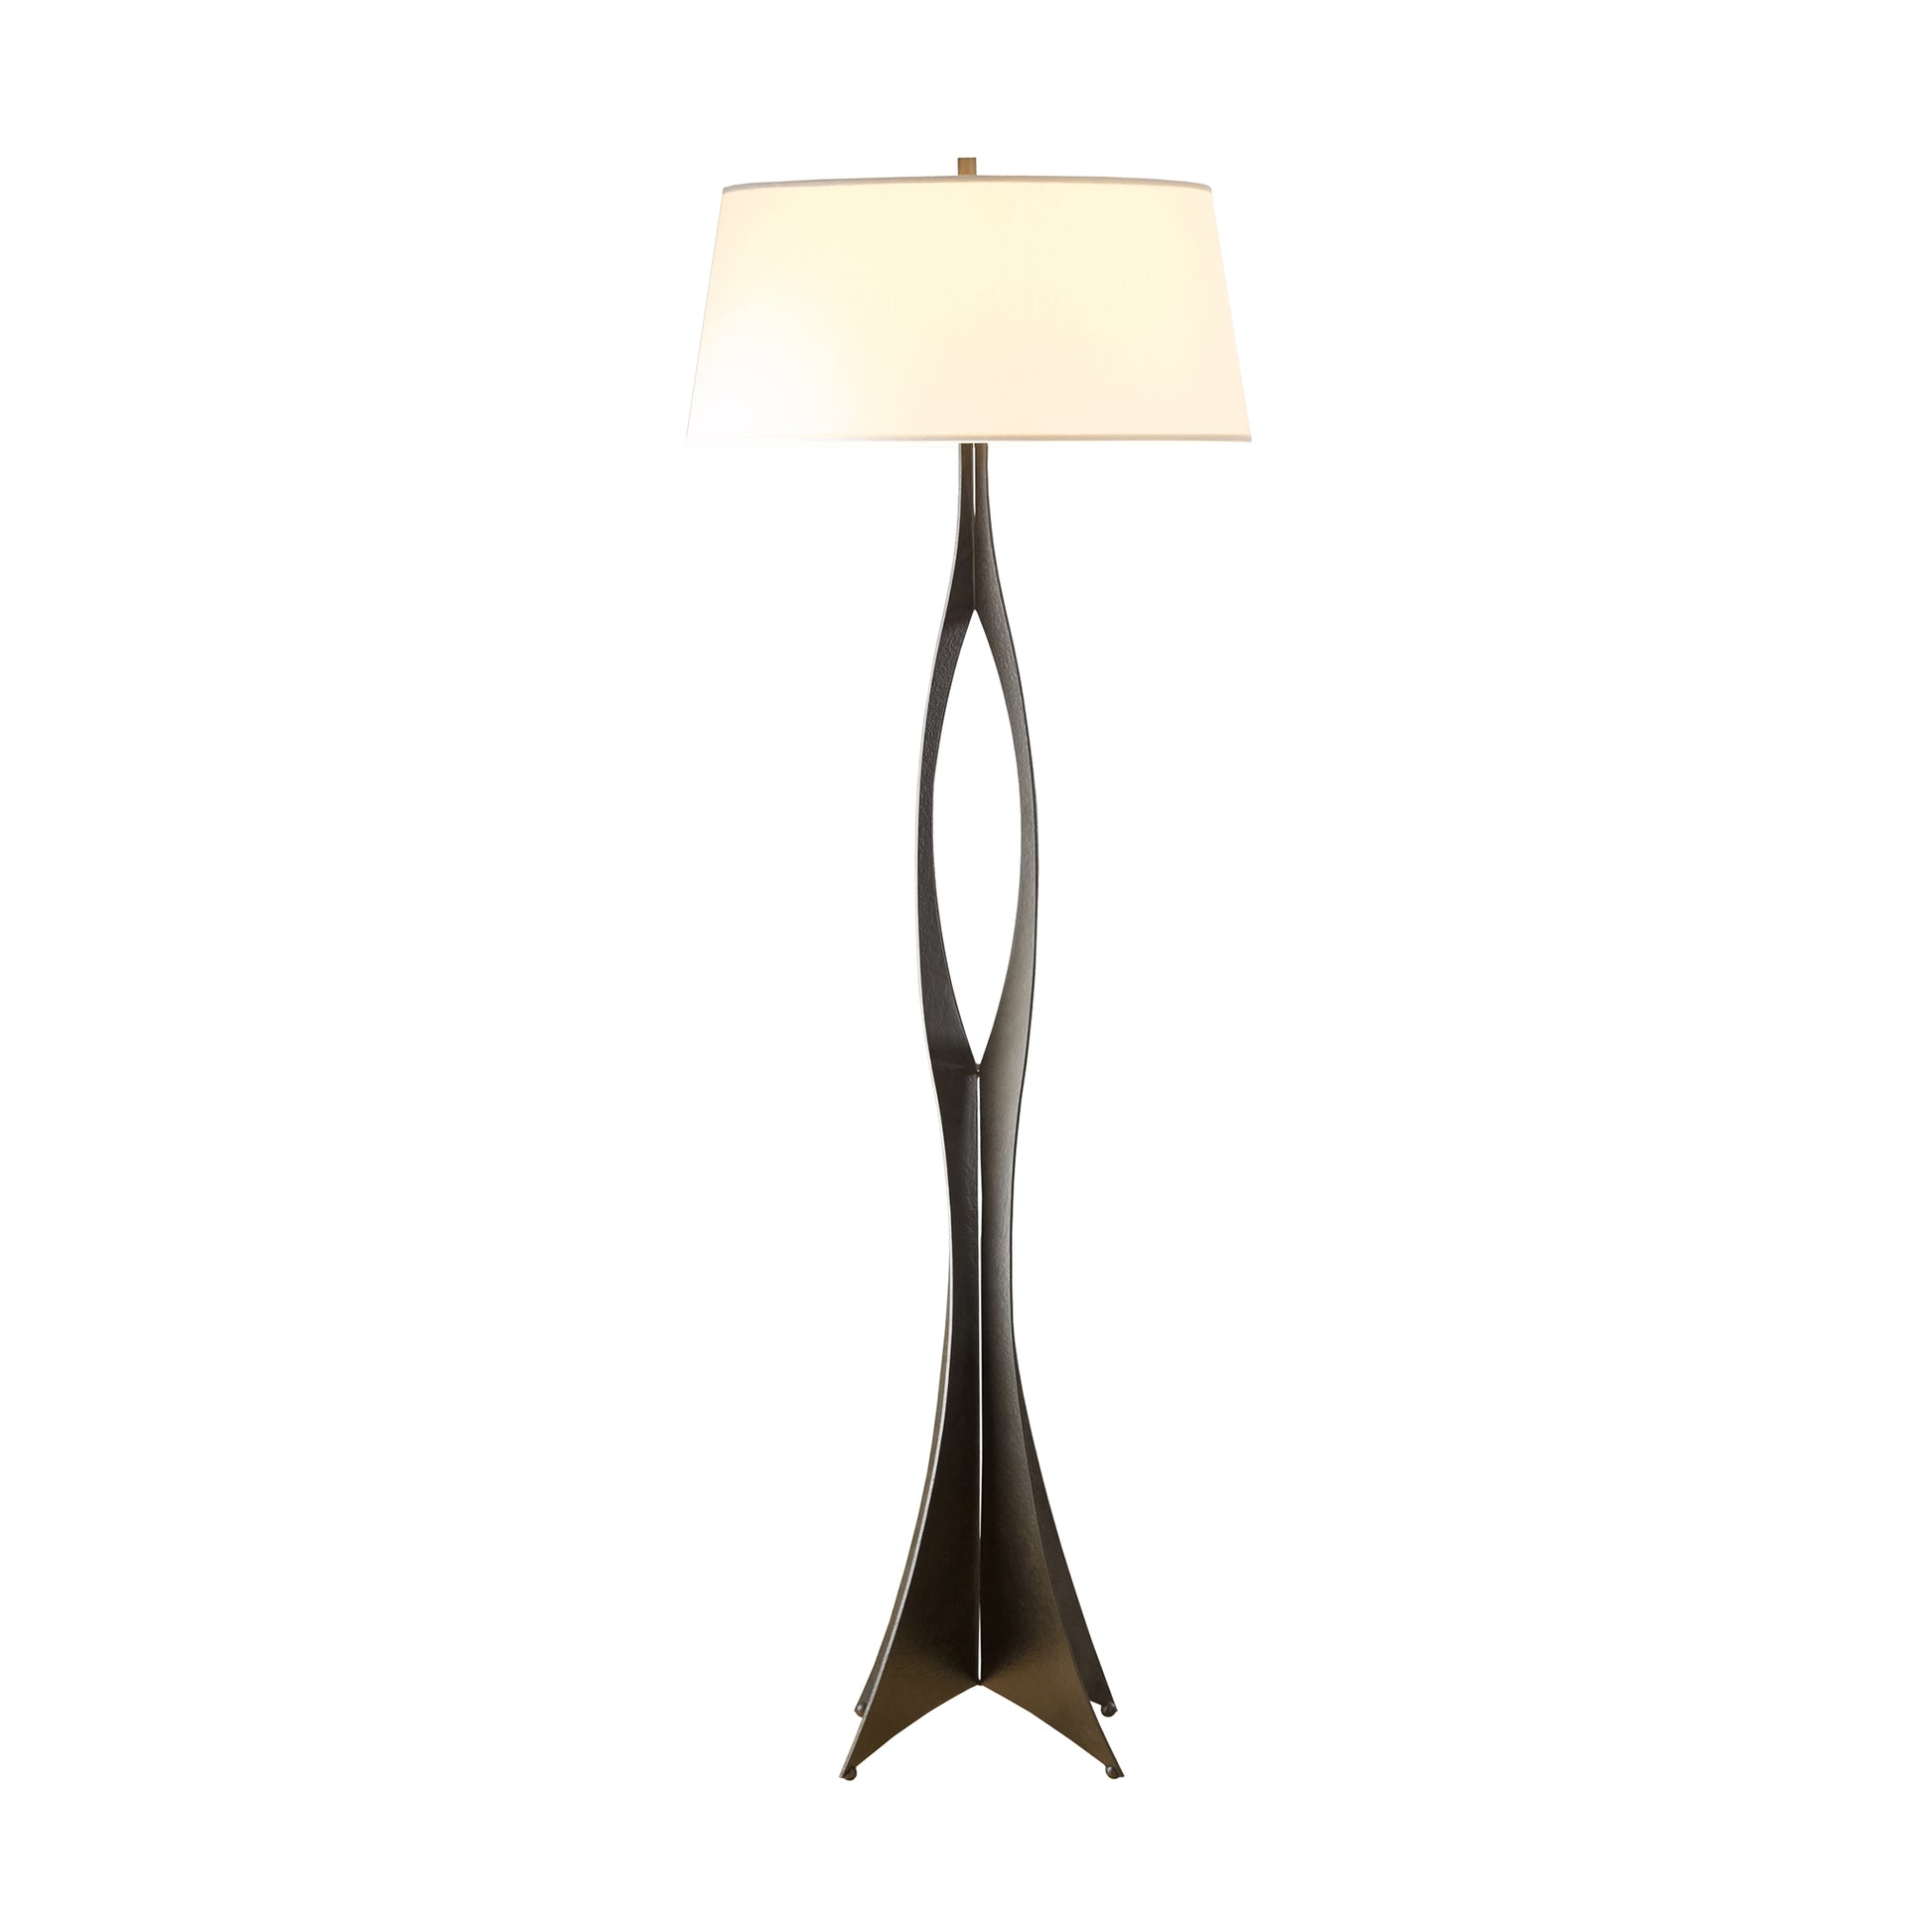 An elegant contemporary style Moreau Floor Lamp with a slender, curving bronze base and a broad, white cylindrical shade, illuminated from within by Hubbardton Forge.